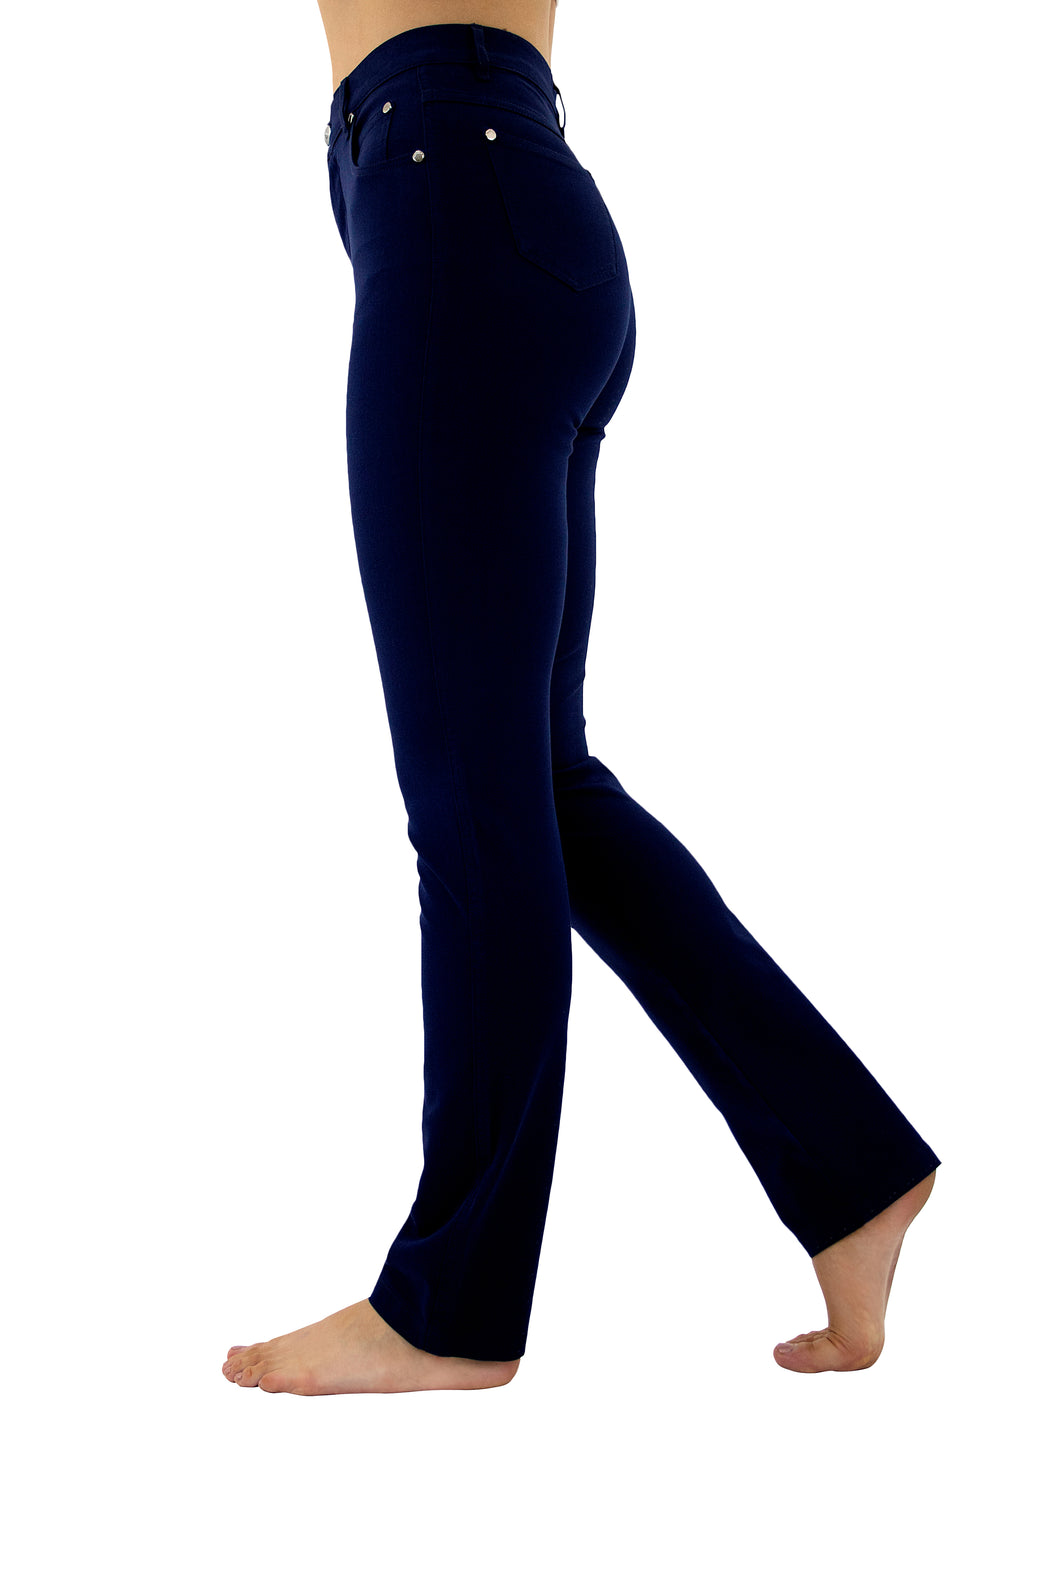 MARBLE FASHIONS 2403 JEANS COLOUR 103 - NAVY